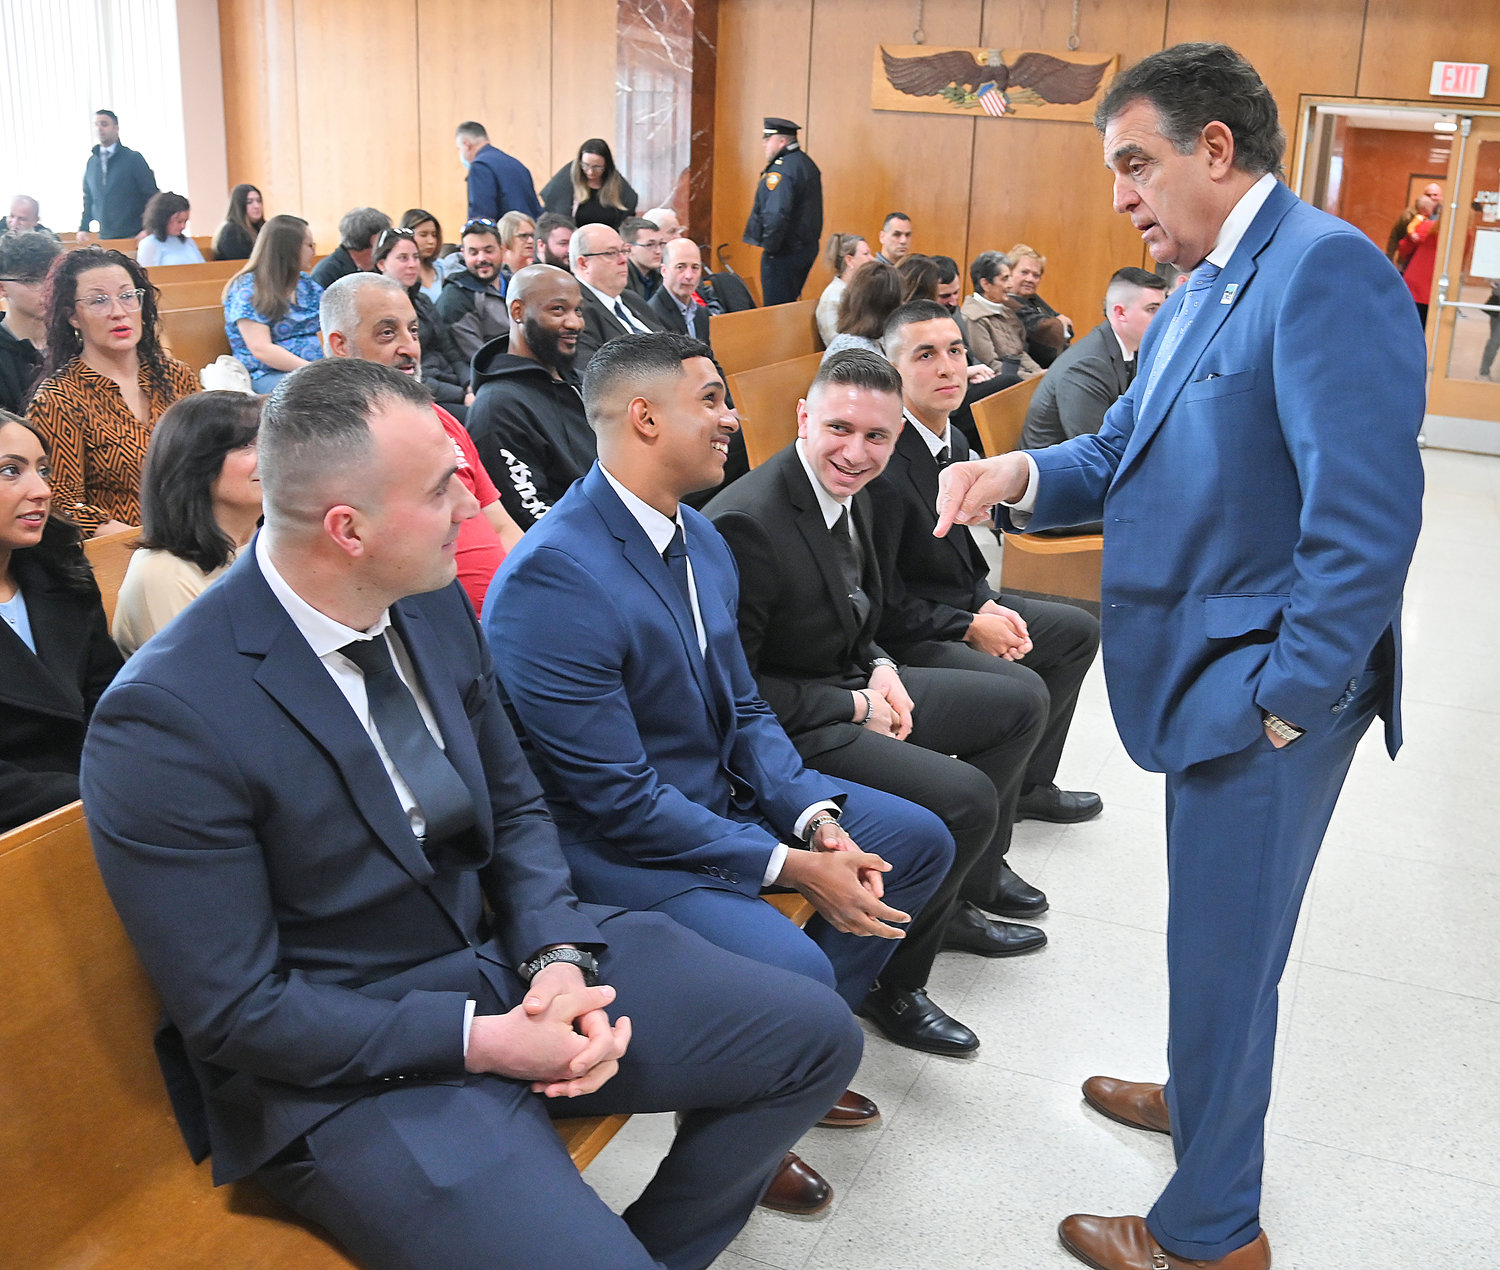 MEETING THE BOSS — Utica Mayor Robert Palmieri, right, greets and jokes with several of the new police officer recruits before their swearing-in ceremony Friday morning.